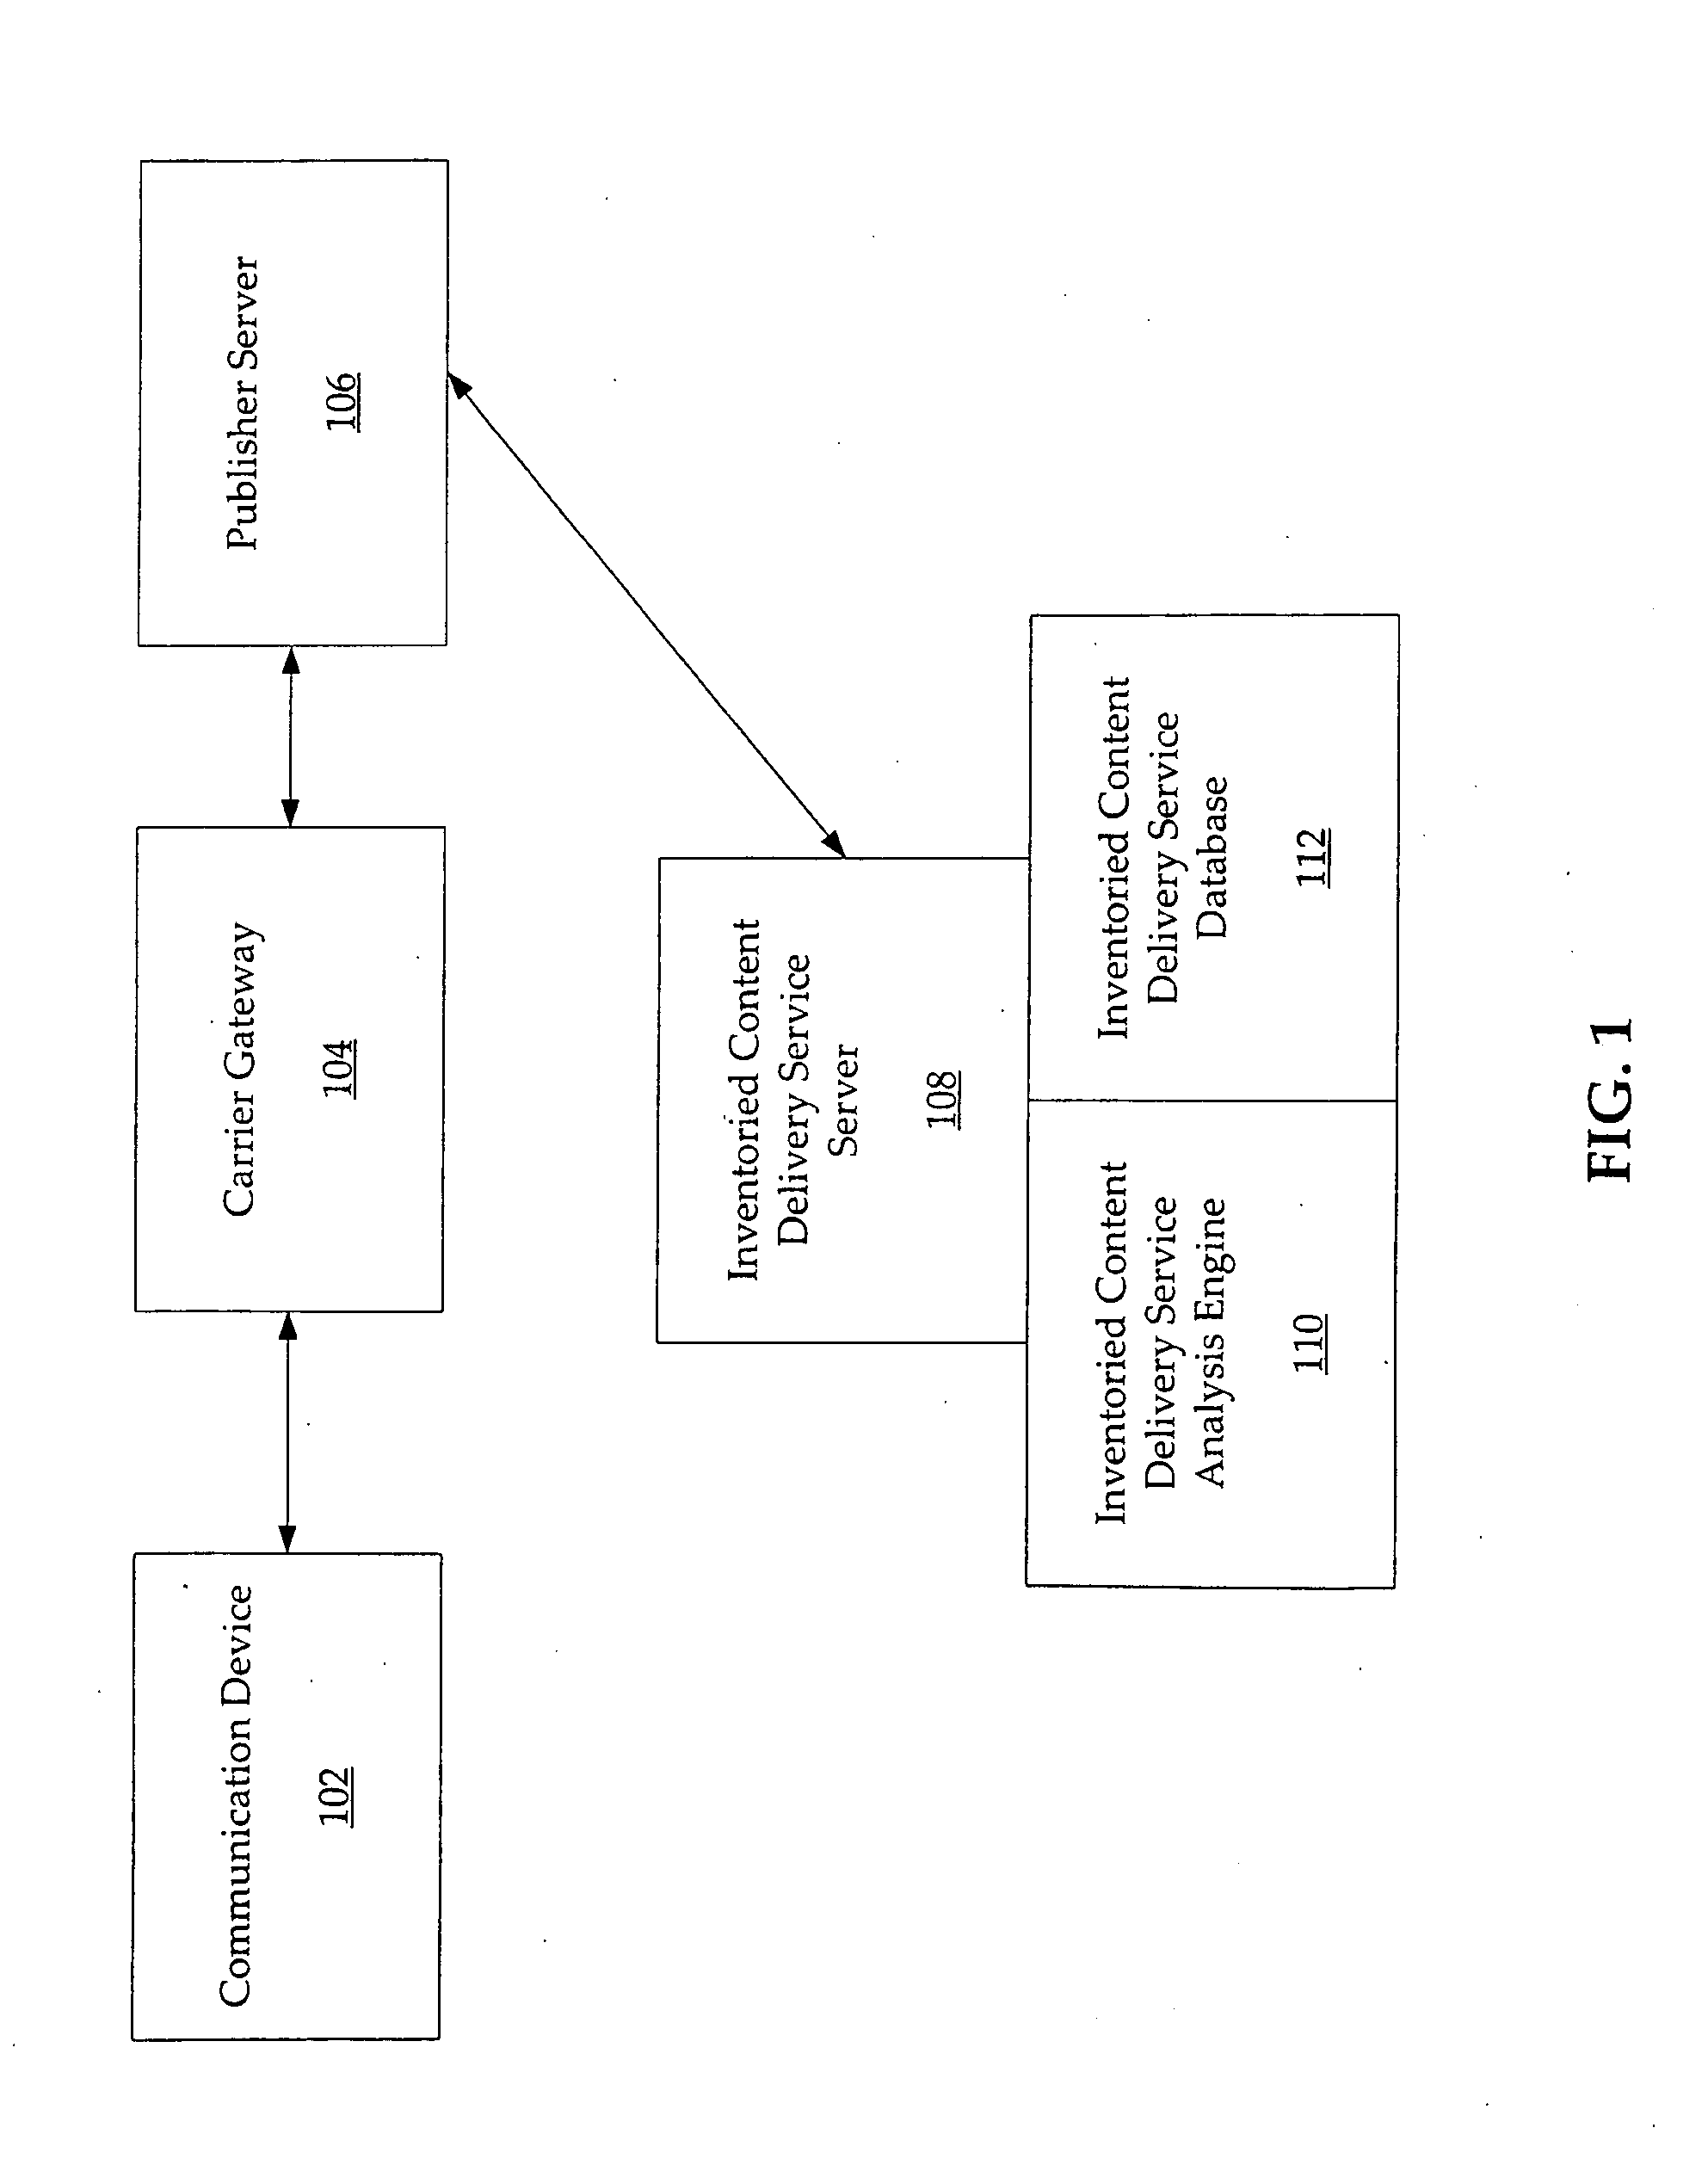 System and method for using key-value pairing to identify uniquely a communication device on a mobile network